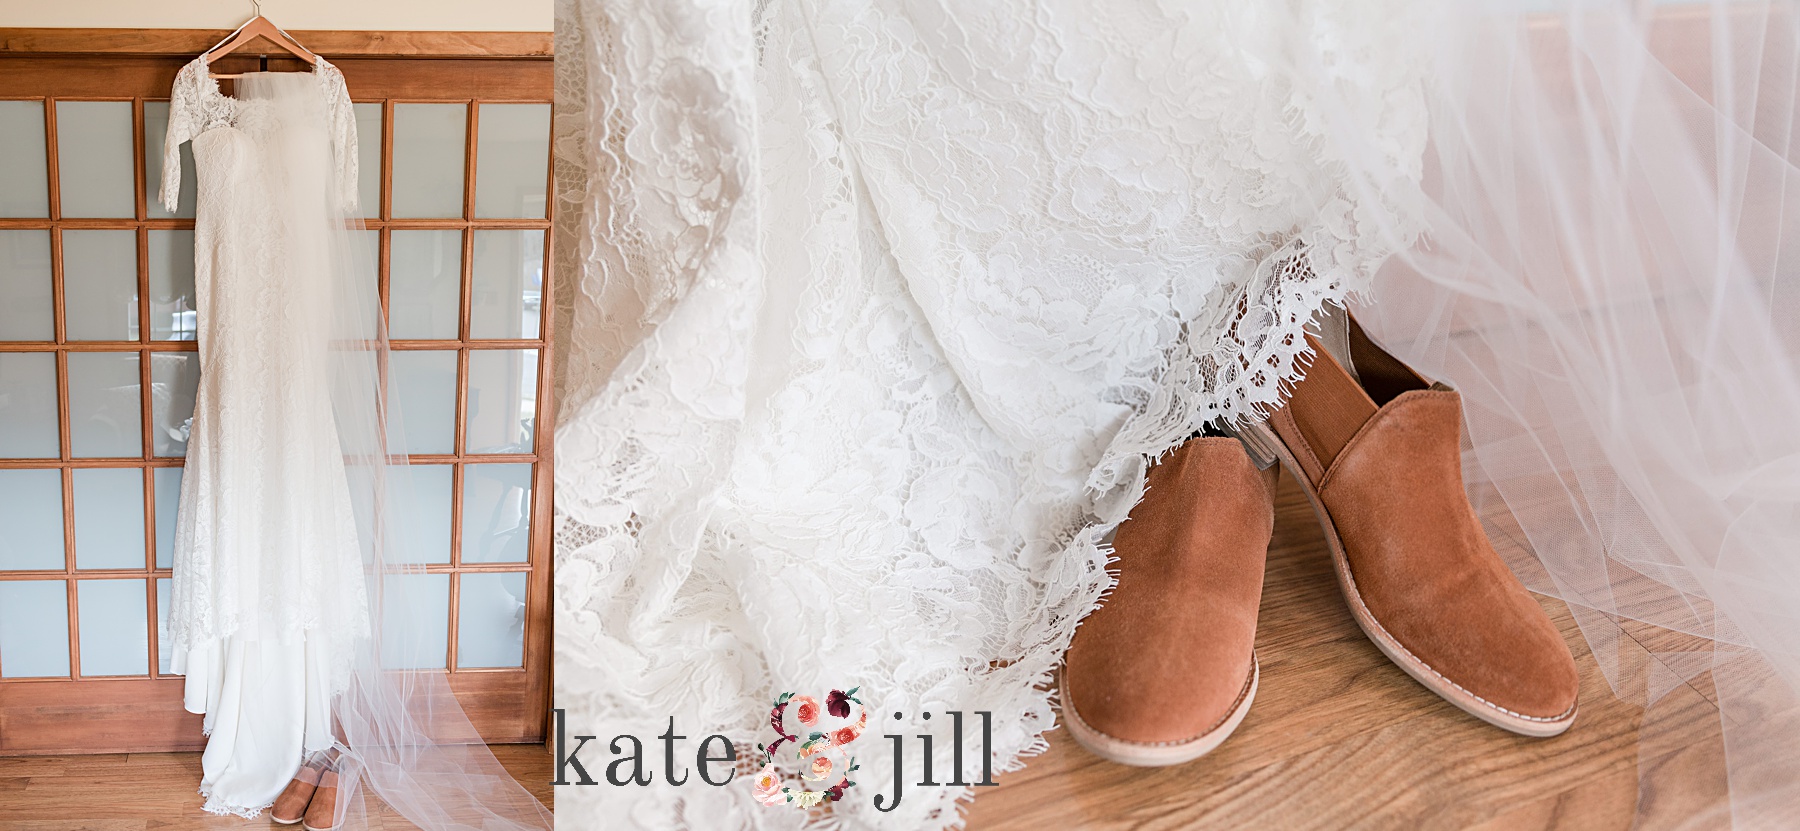 clarks shoes and wedding gown